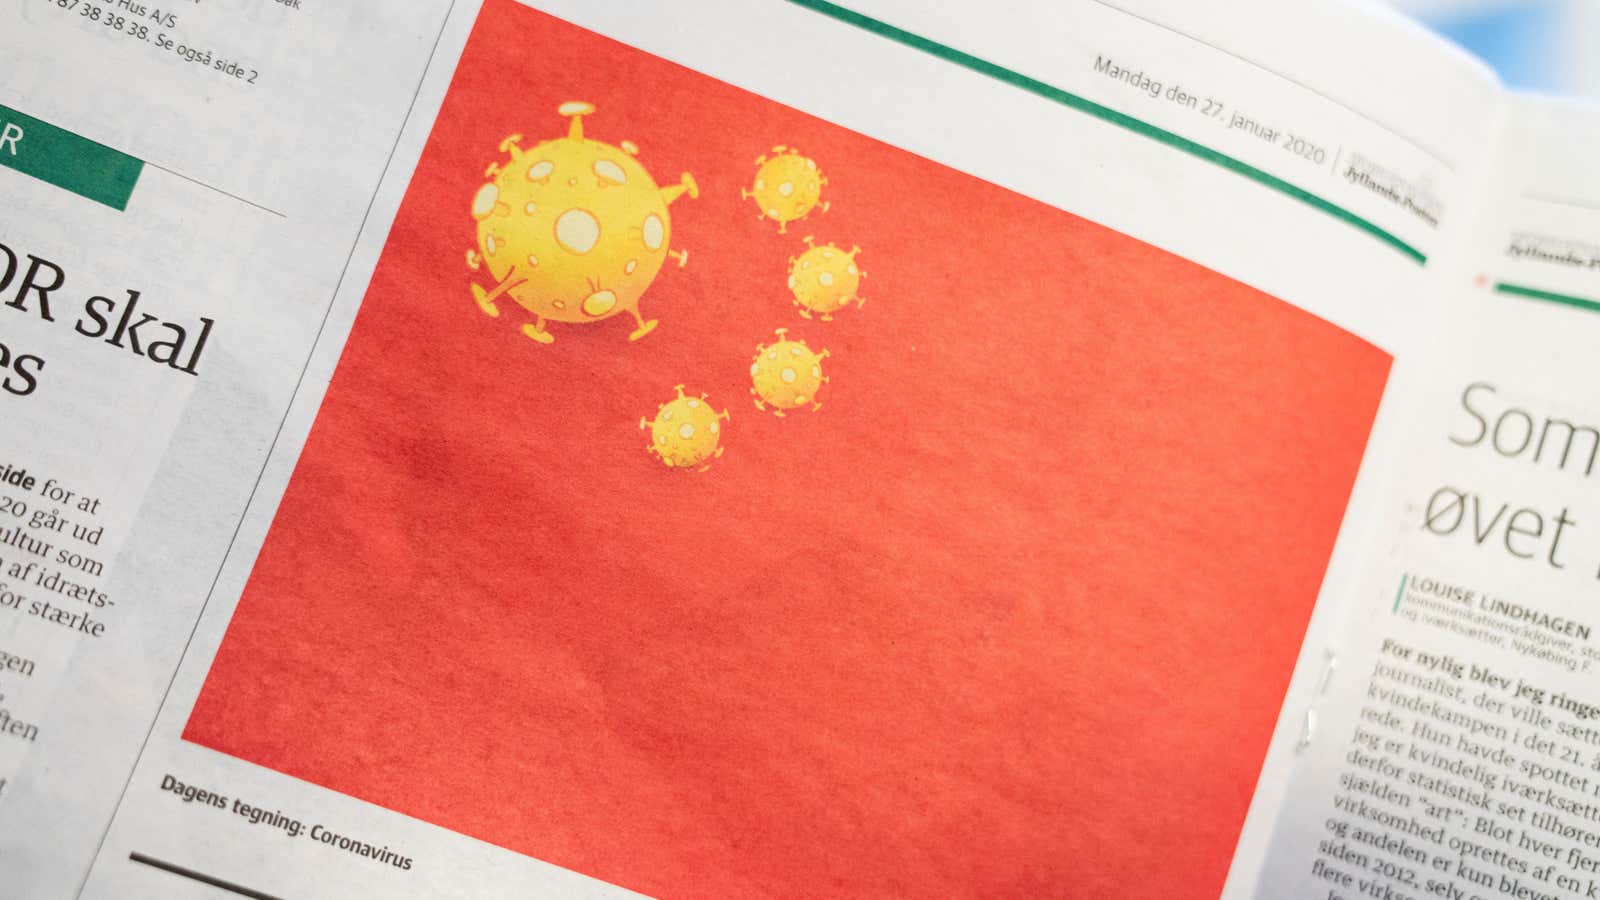 A cartoon of the coronavirus depicted as part of the Chinese national flag is pictured in a Danish newspaper. The Chinese embassy in Copenhagen said it “offends human conscience.”